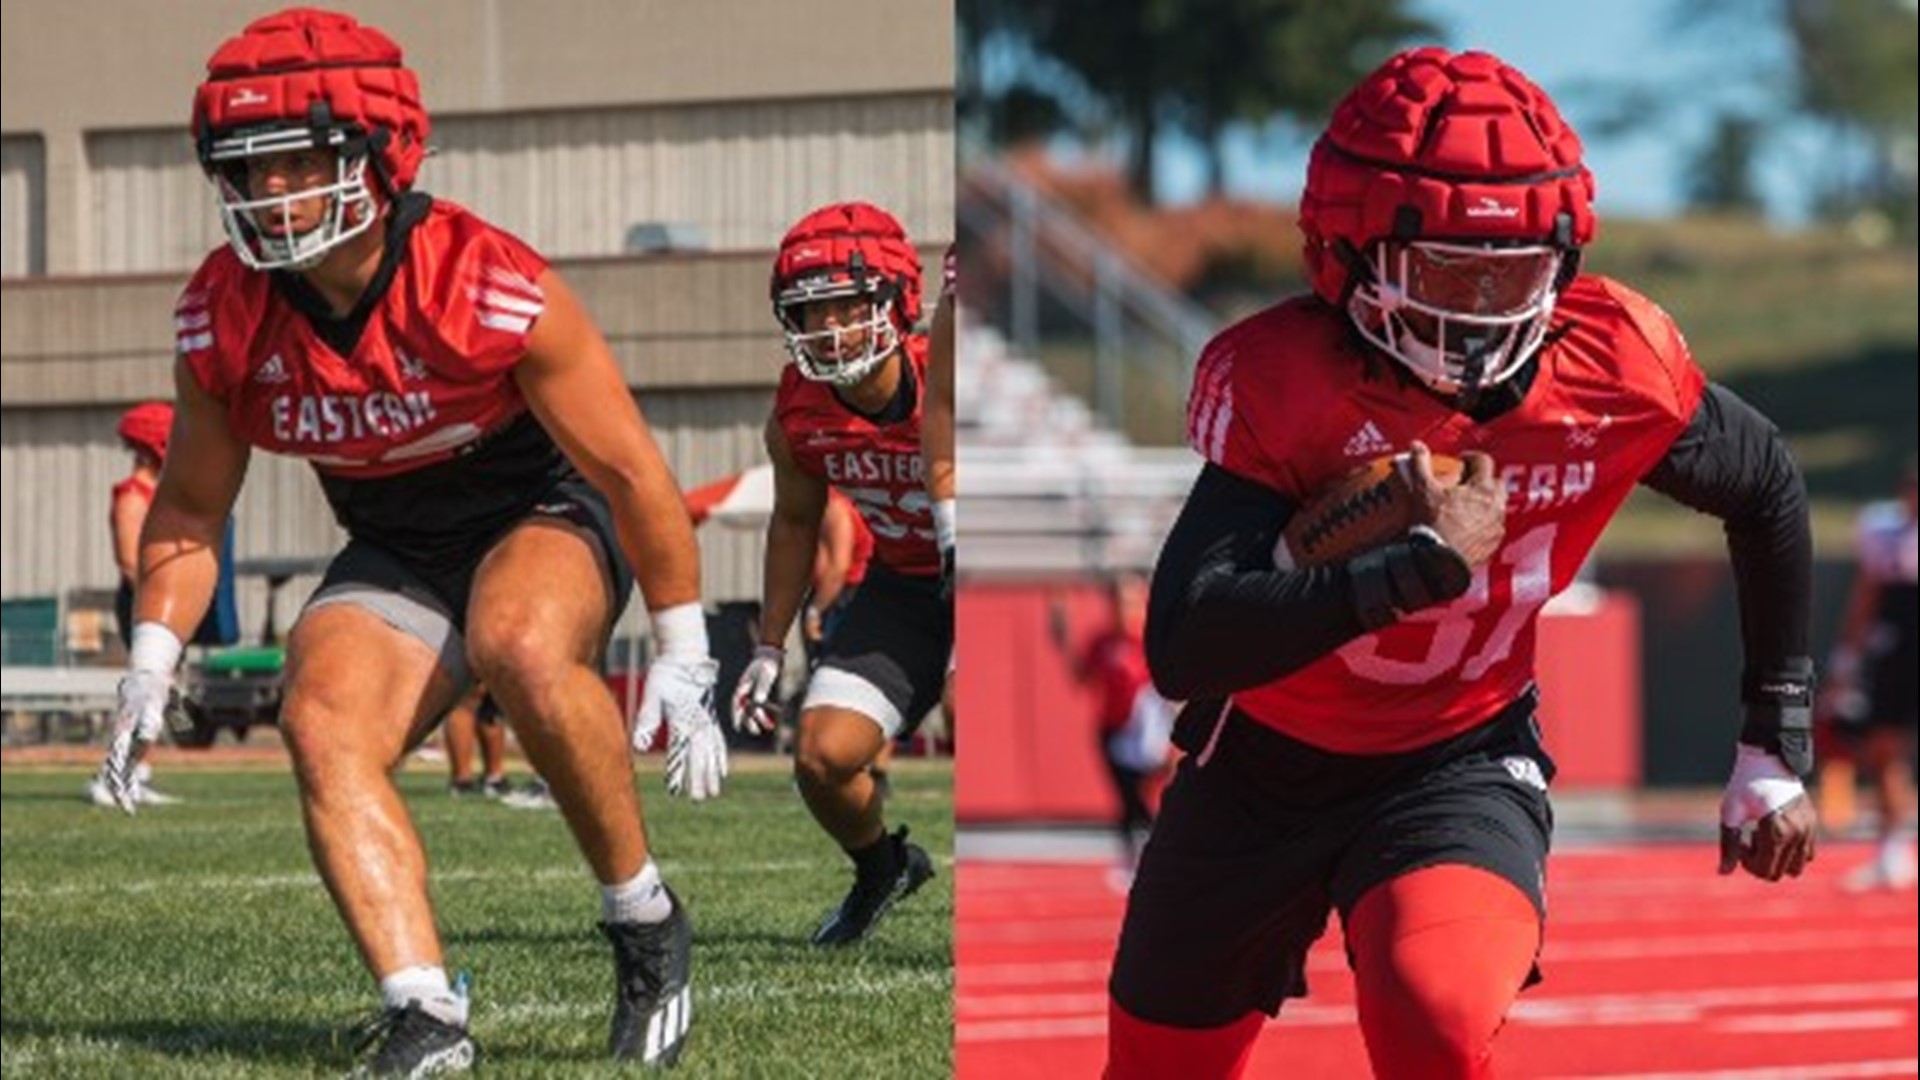 EWU has a pair of experienced transfers that they think will play big roles on the defense this season.